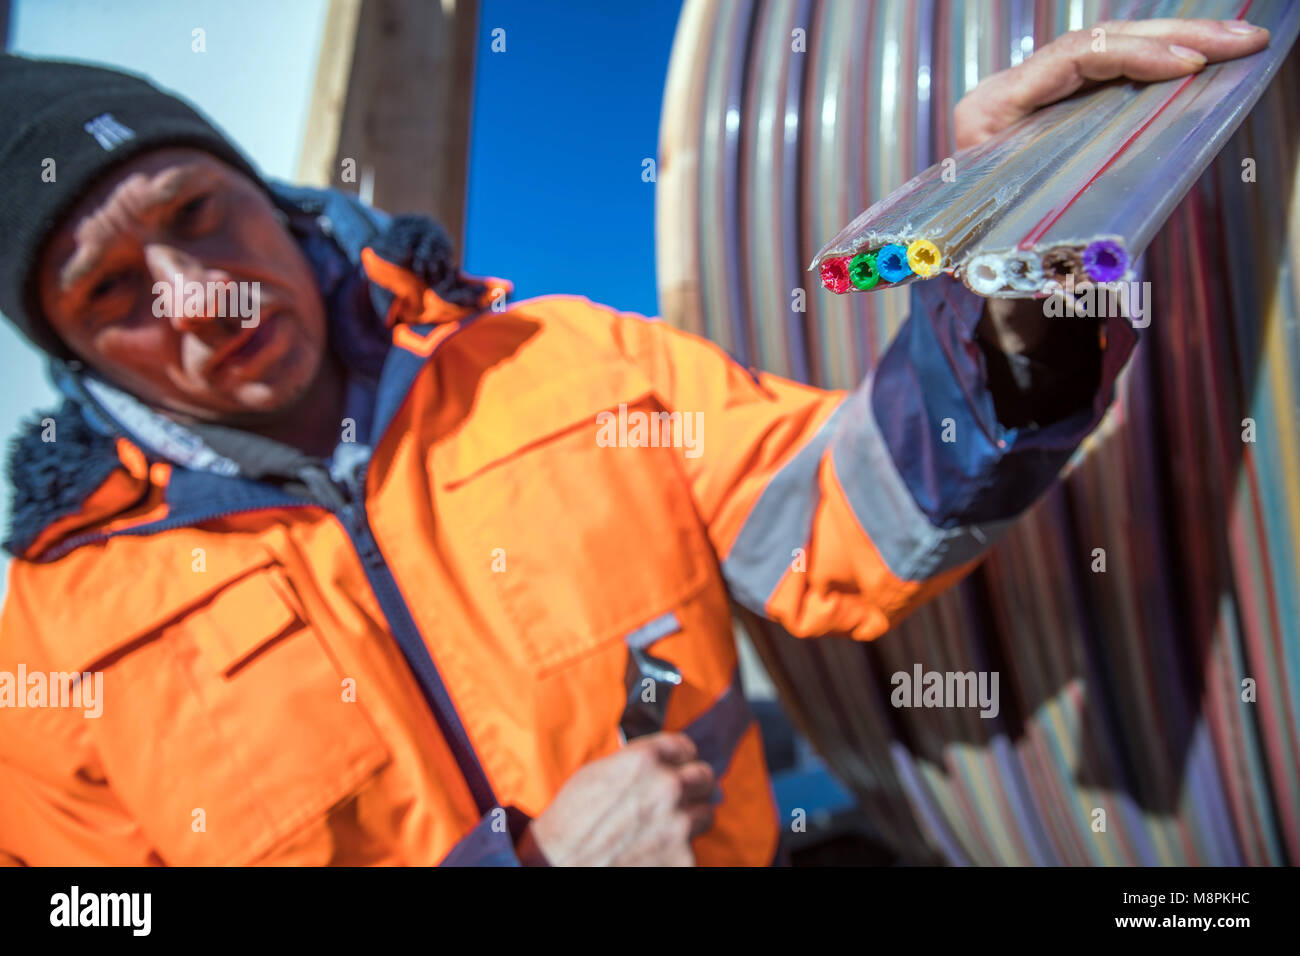 19 March 2018, Germany, Siggelkow: A man works on a construction site in the Ludwigslust-Parchim community, where extensive development of the broadband has now begun. Broadband company 'Wemcom Breitband', energy provider 'Wemag' and the municipal utilities of Schwerin are cooperating to expand the region's digital infrastructure. Photo: Jens Büttner/dpa-Zentralbild/dpa Stock Photo